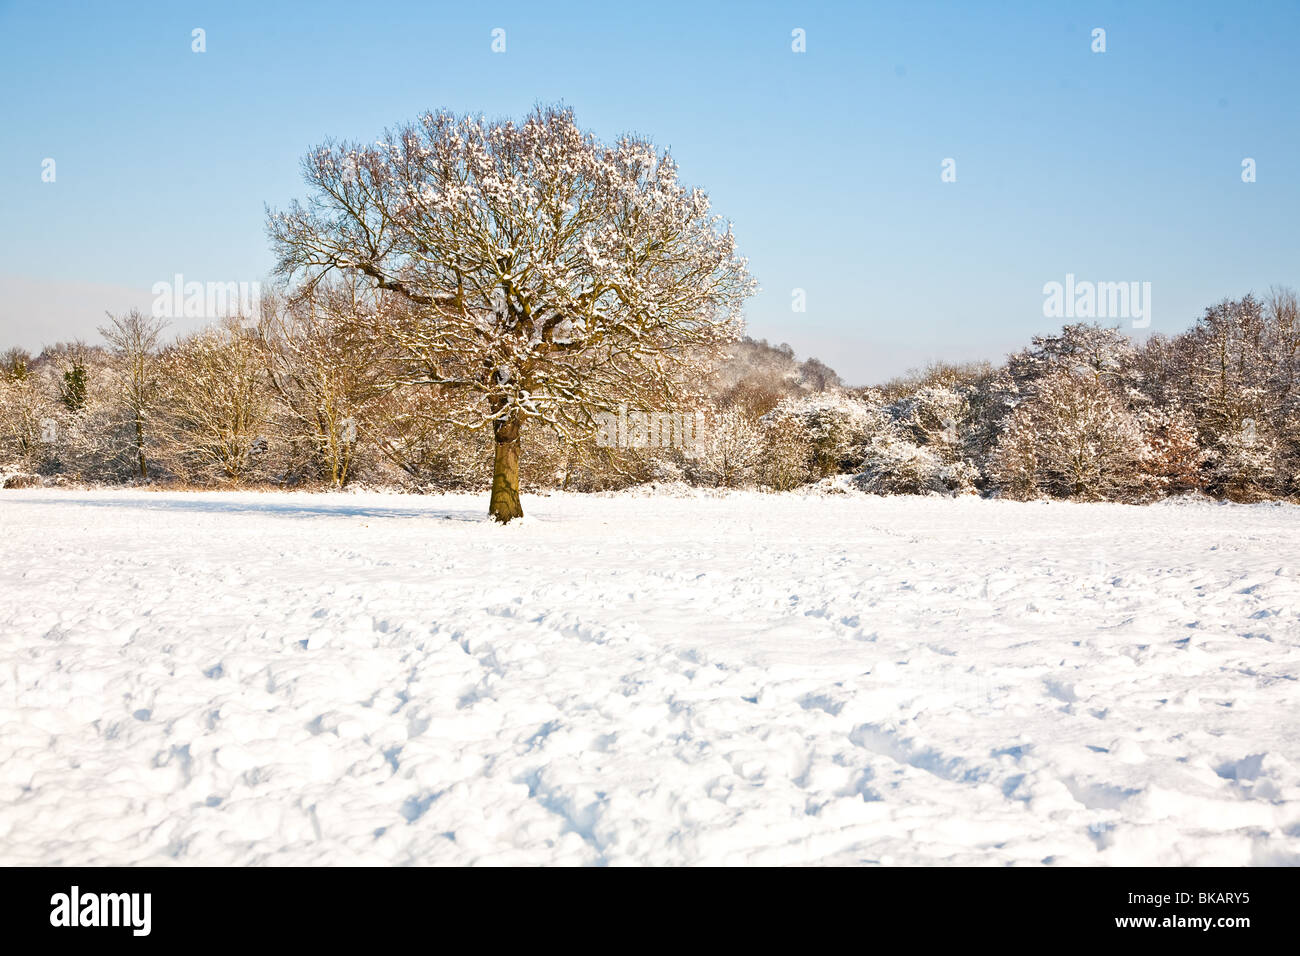 Snow covered field with Single tree in Winter Stock Photo